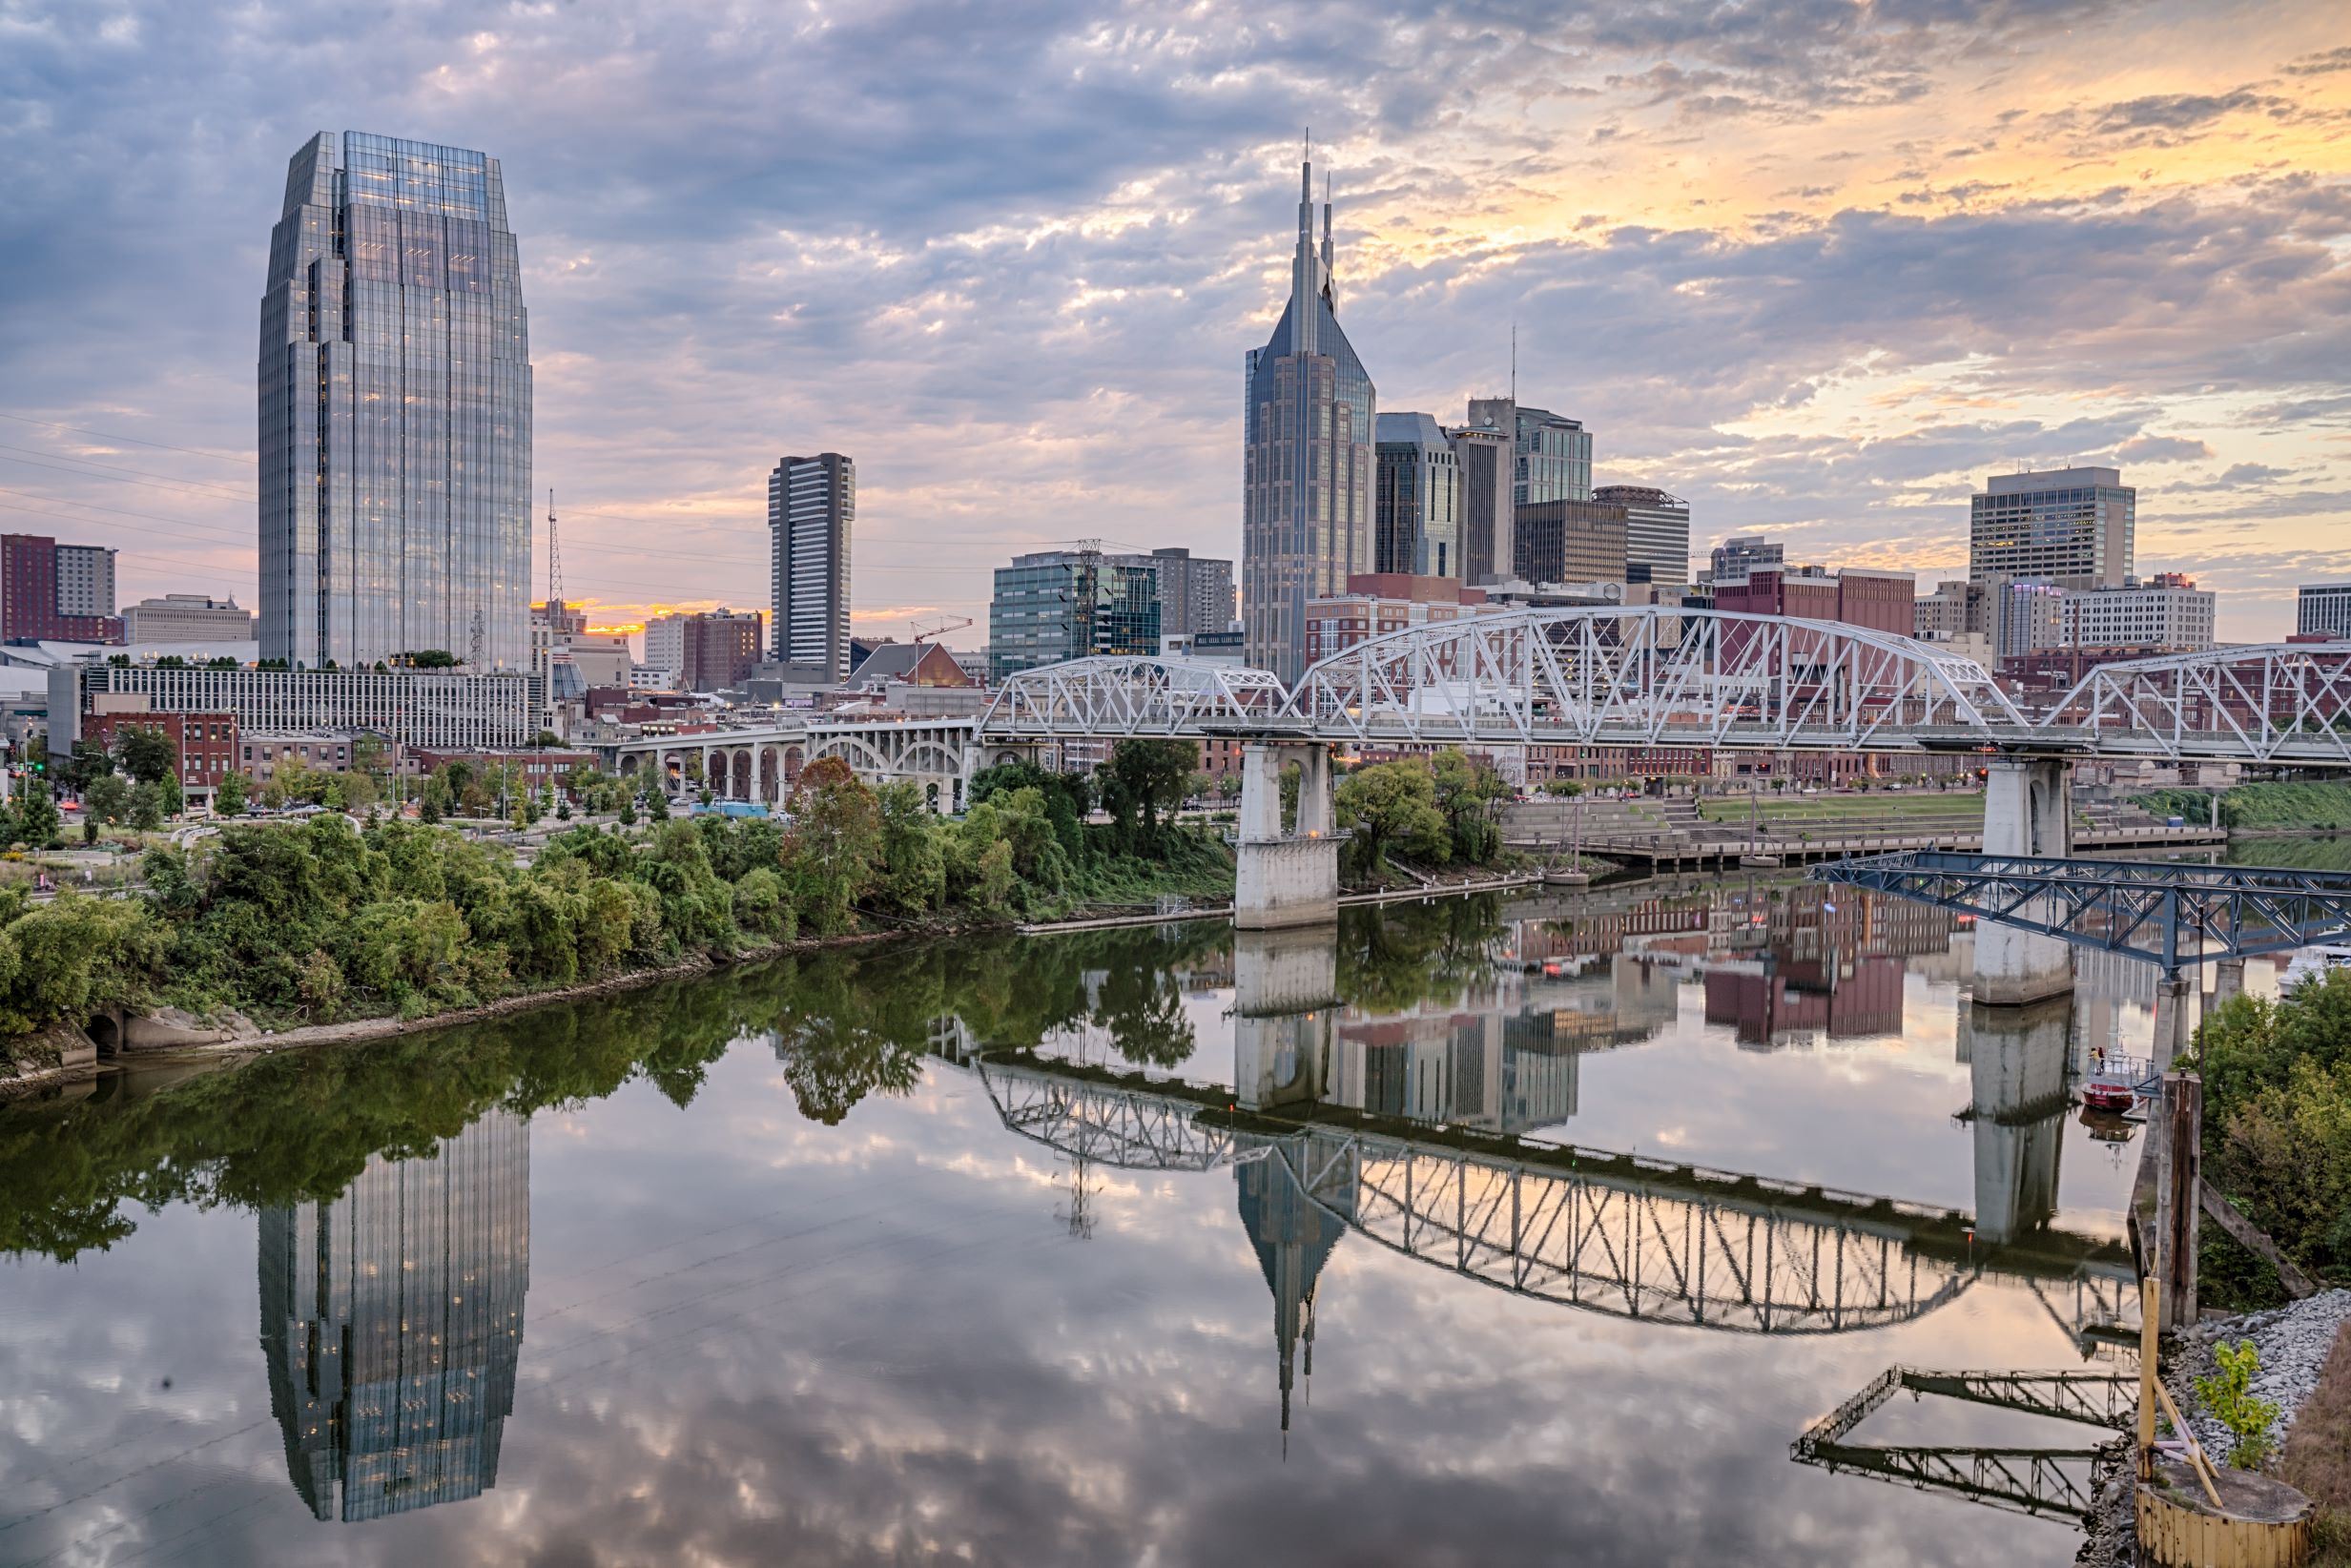 Downtown nashville, tennessee skyline at dusk with reflection on the cumberland river.